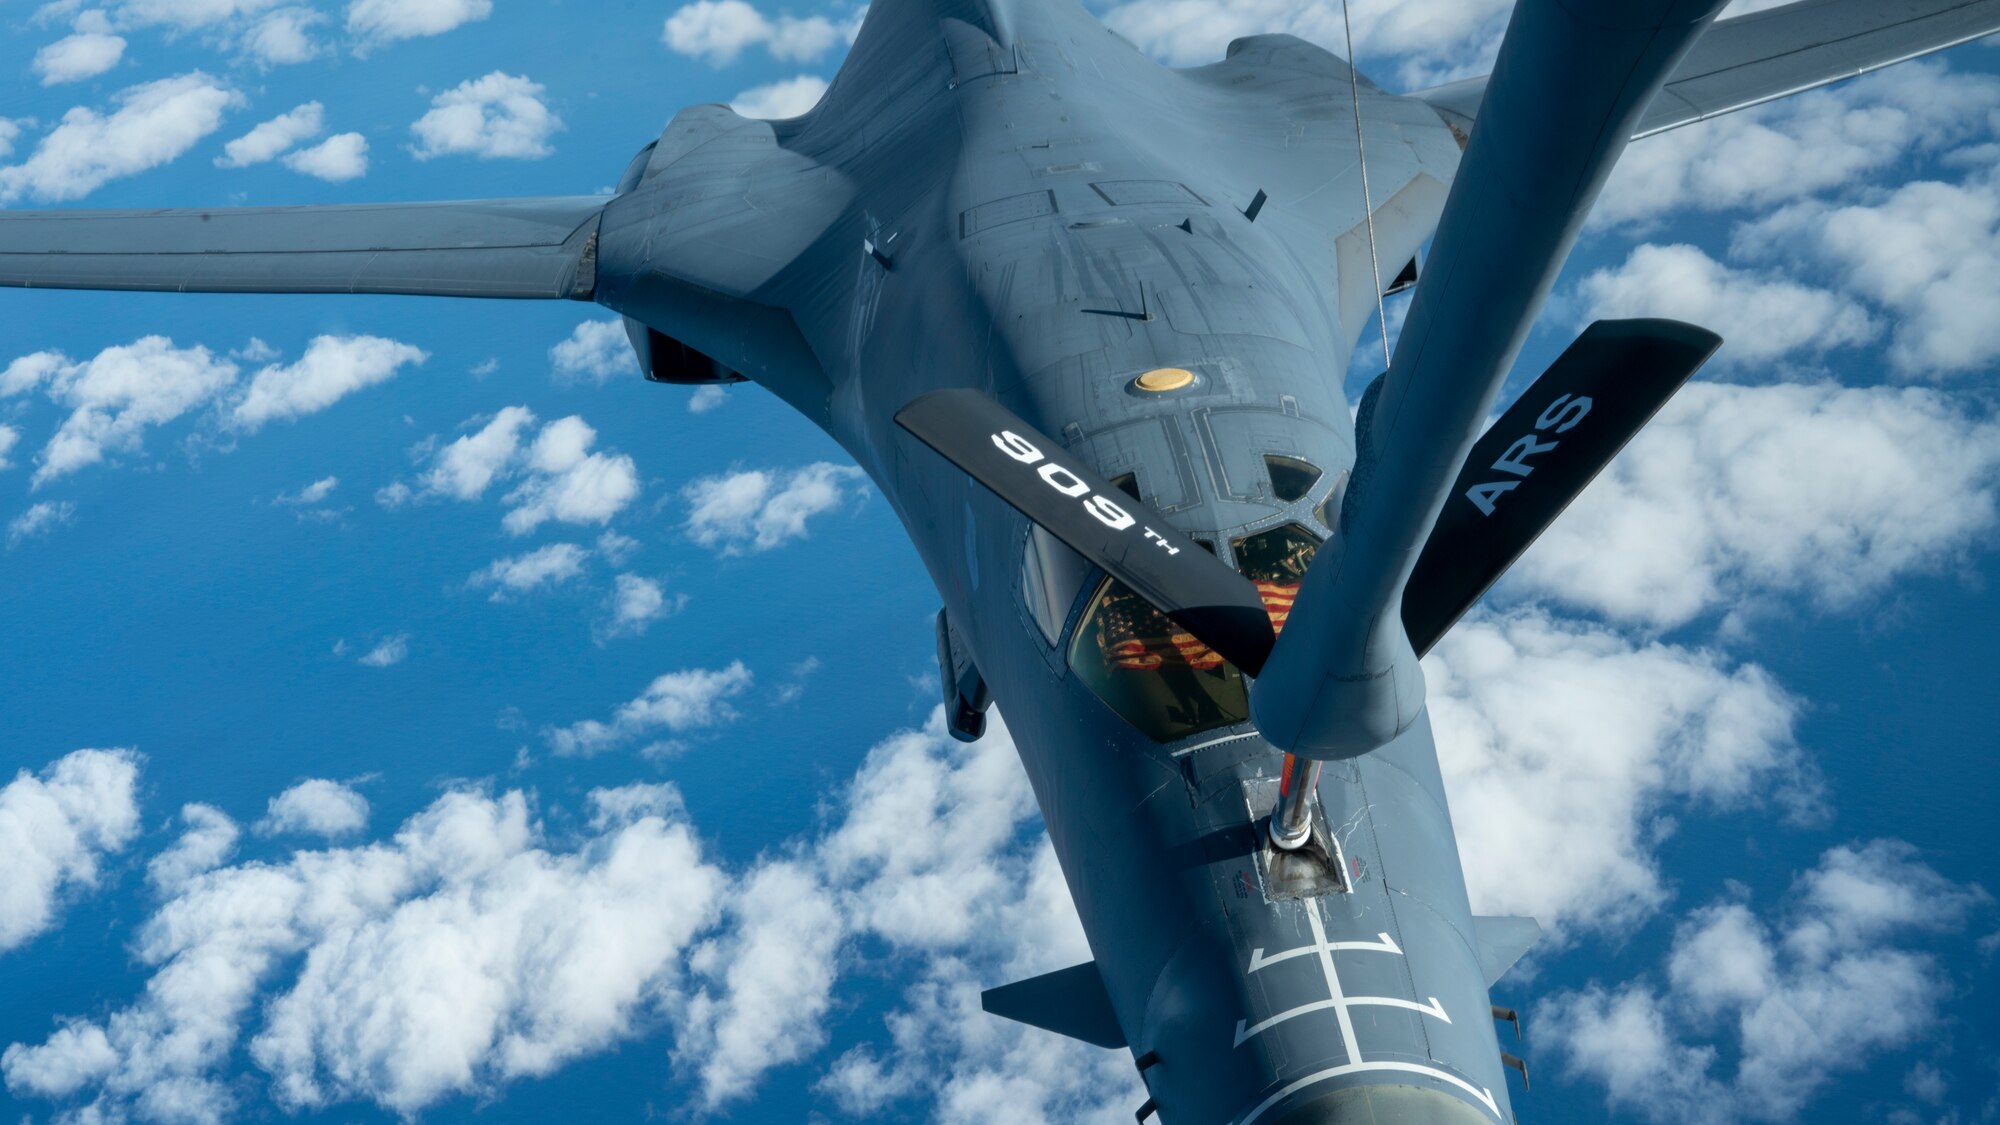 A B-1B Lancer from the 7th Bomber Wing receives fuel from a KC-135R Stratotanker over the Pacific Ocean